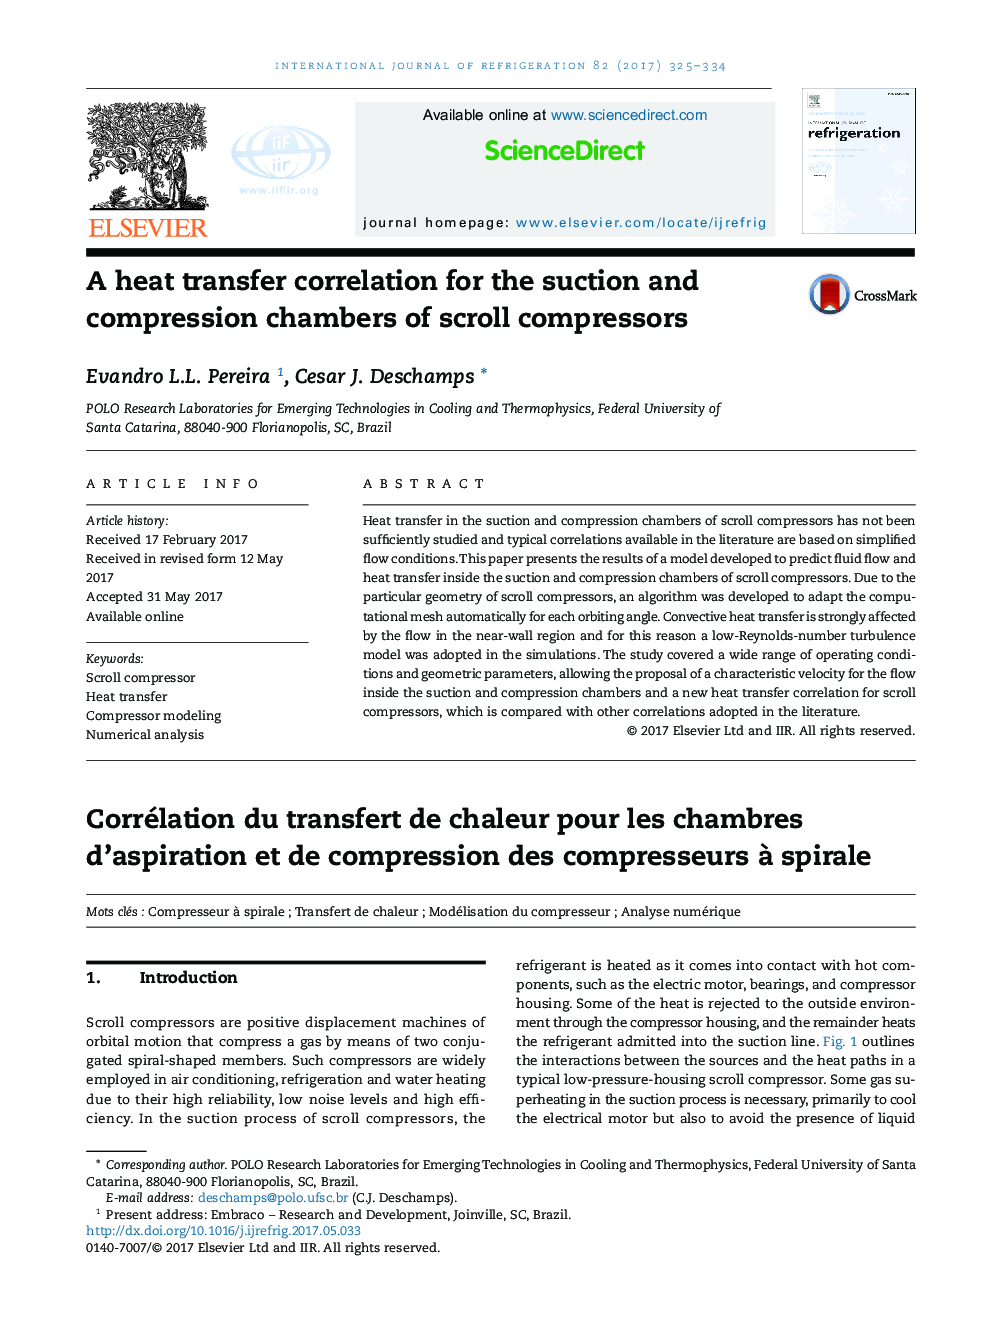 A heat transfer correlation for the suction and compression chambers of scroll compressors